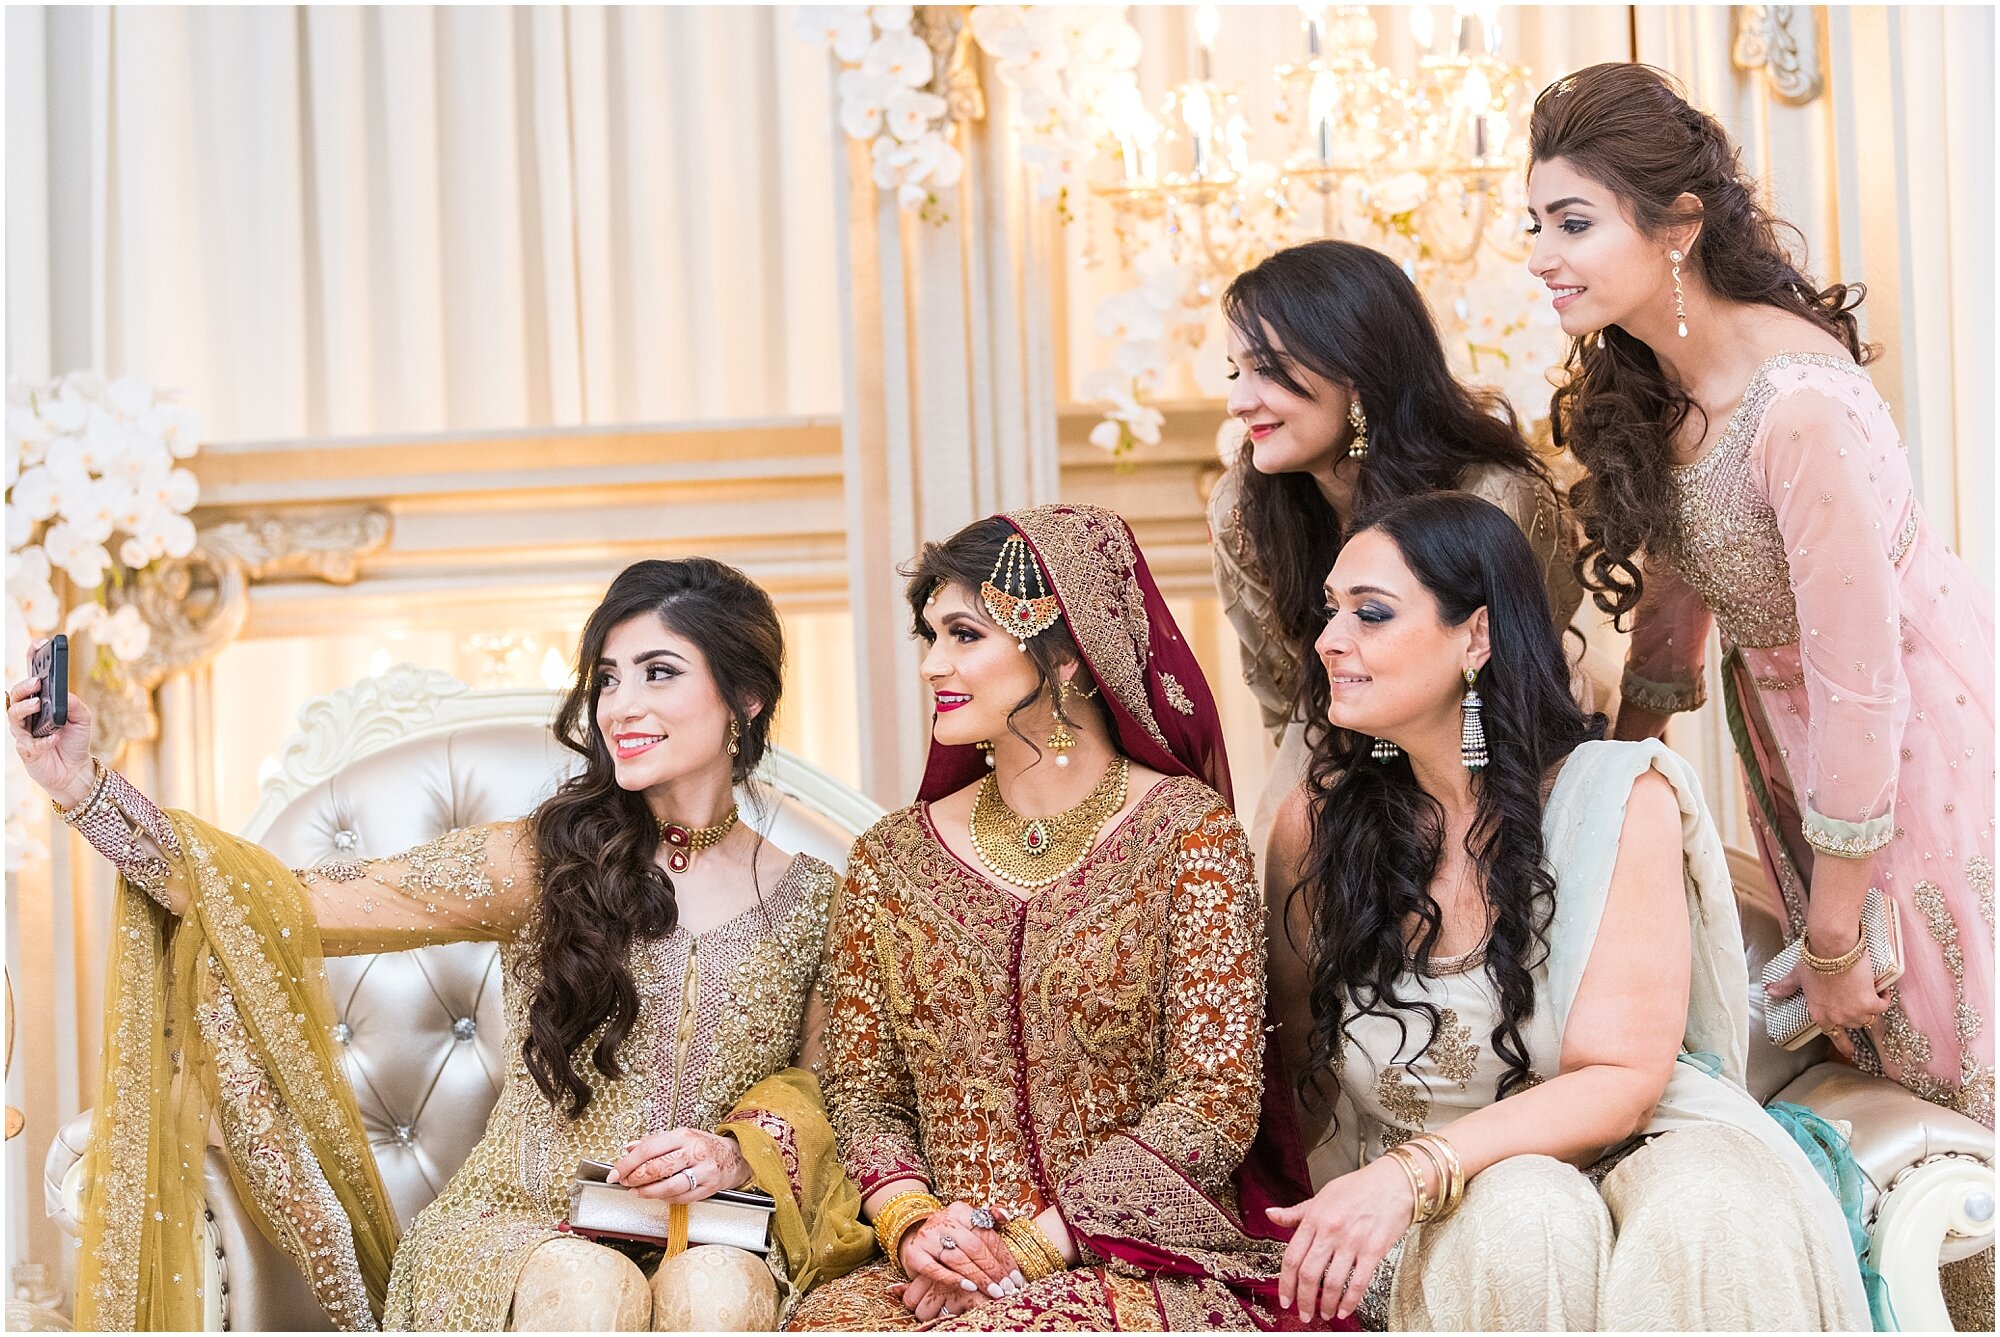 Pakistani bride taking a selfie with her friends at her wedding